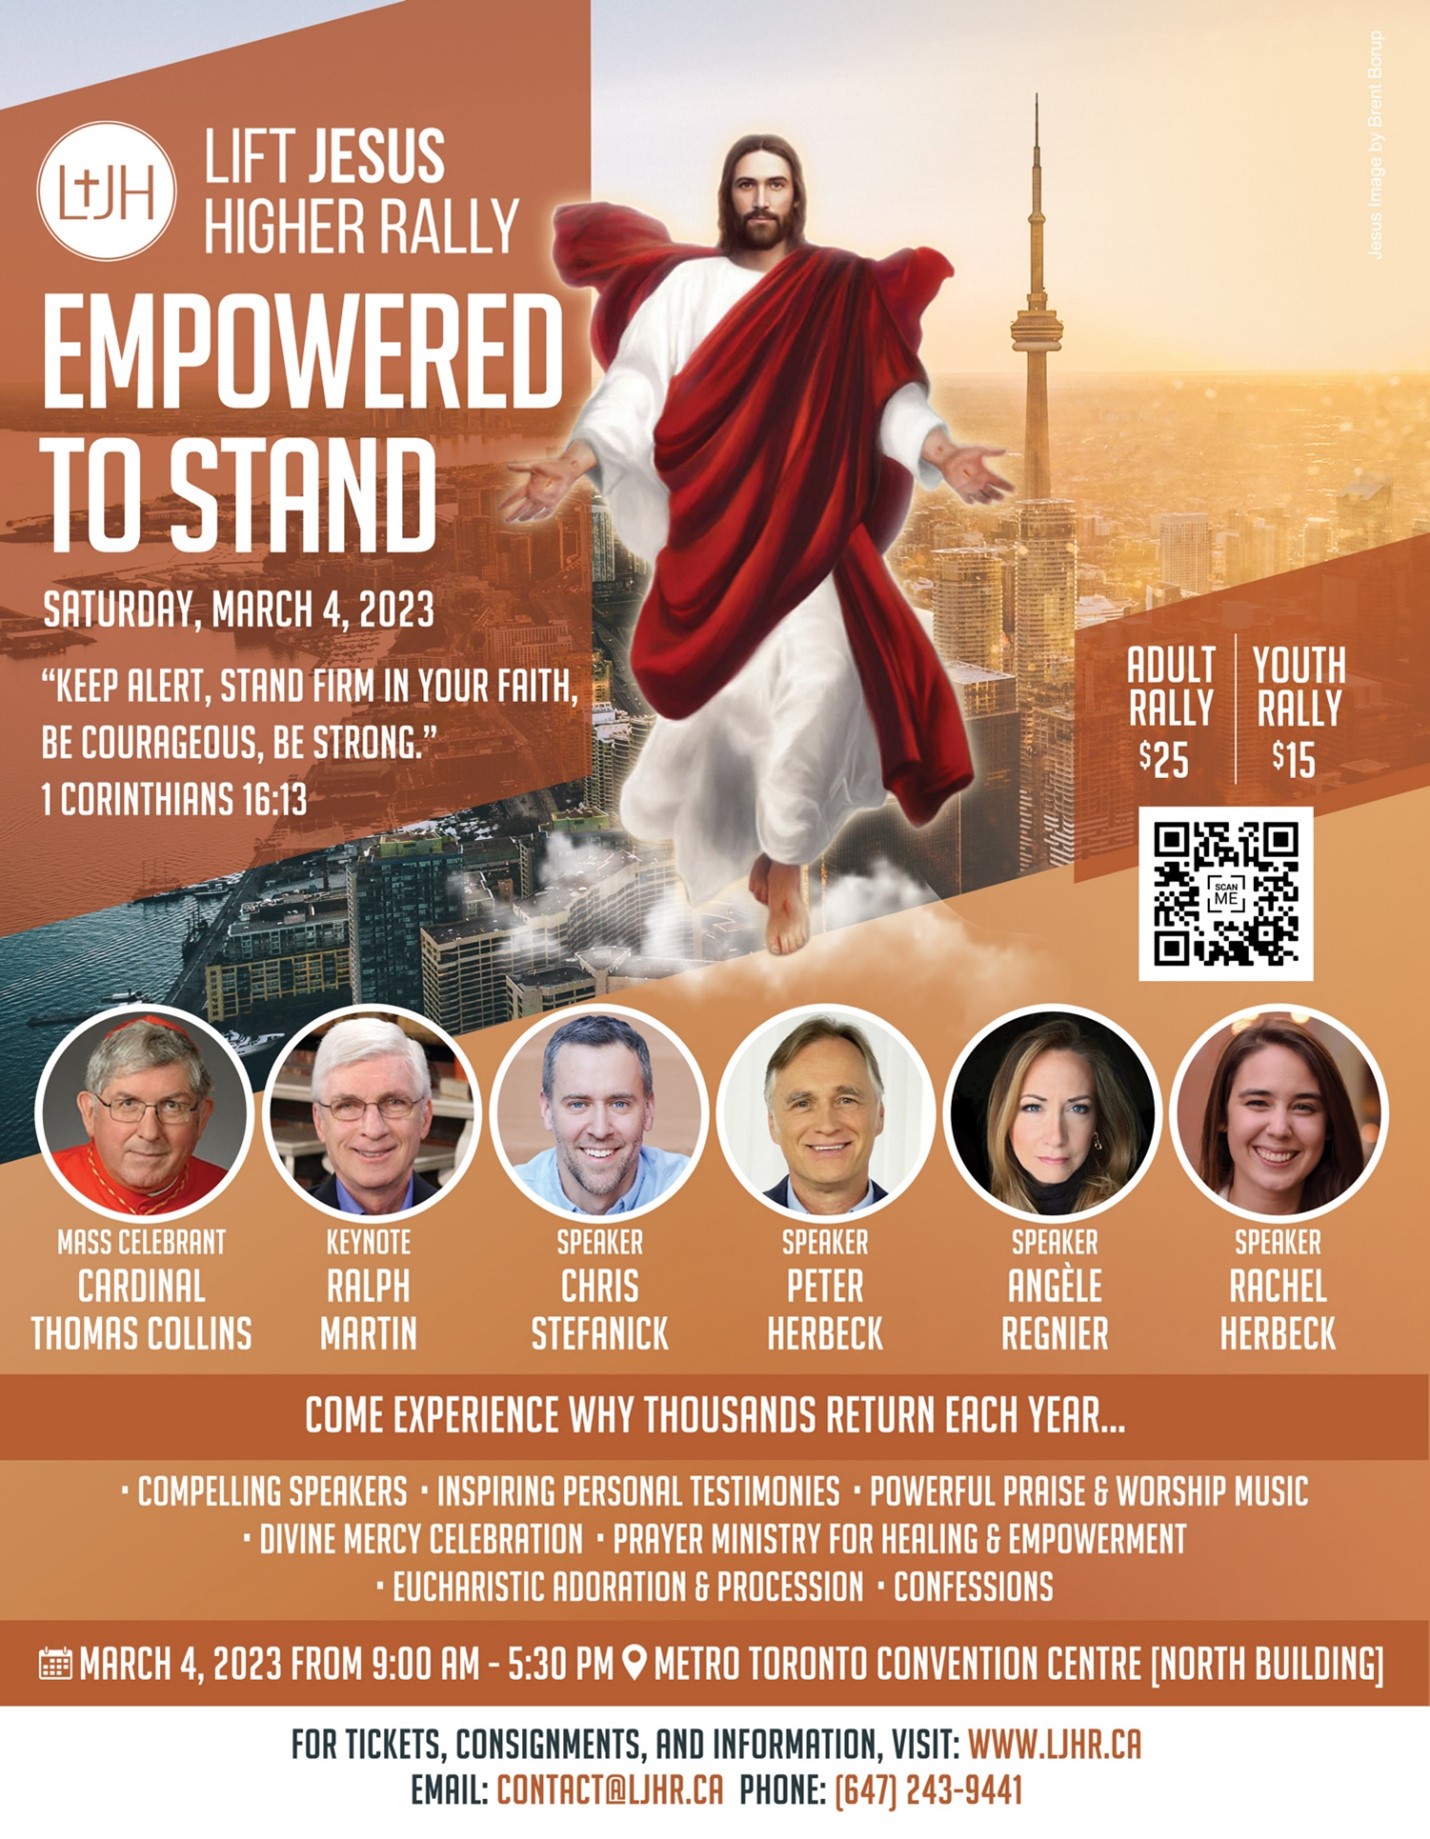 Lift Jesus Higher Brochure - Empowered to Stand - Saturday, March 4, 2023 "Keep Alert, Stand Firm in Your Faith, Be Courageous, Be Strong." 1 Corinthians 16:13